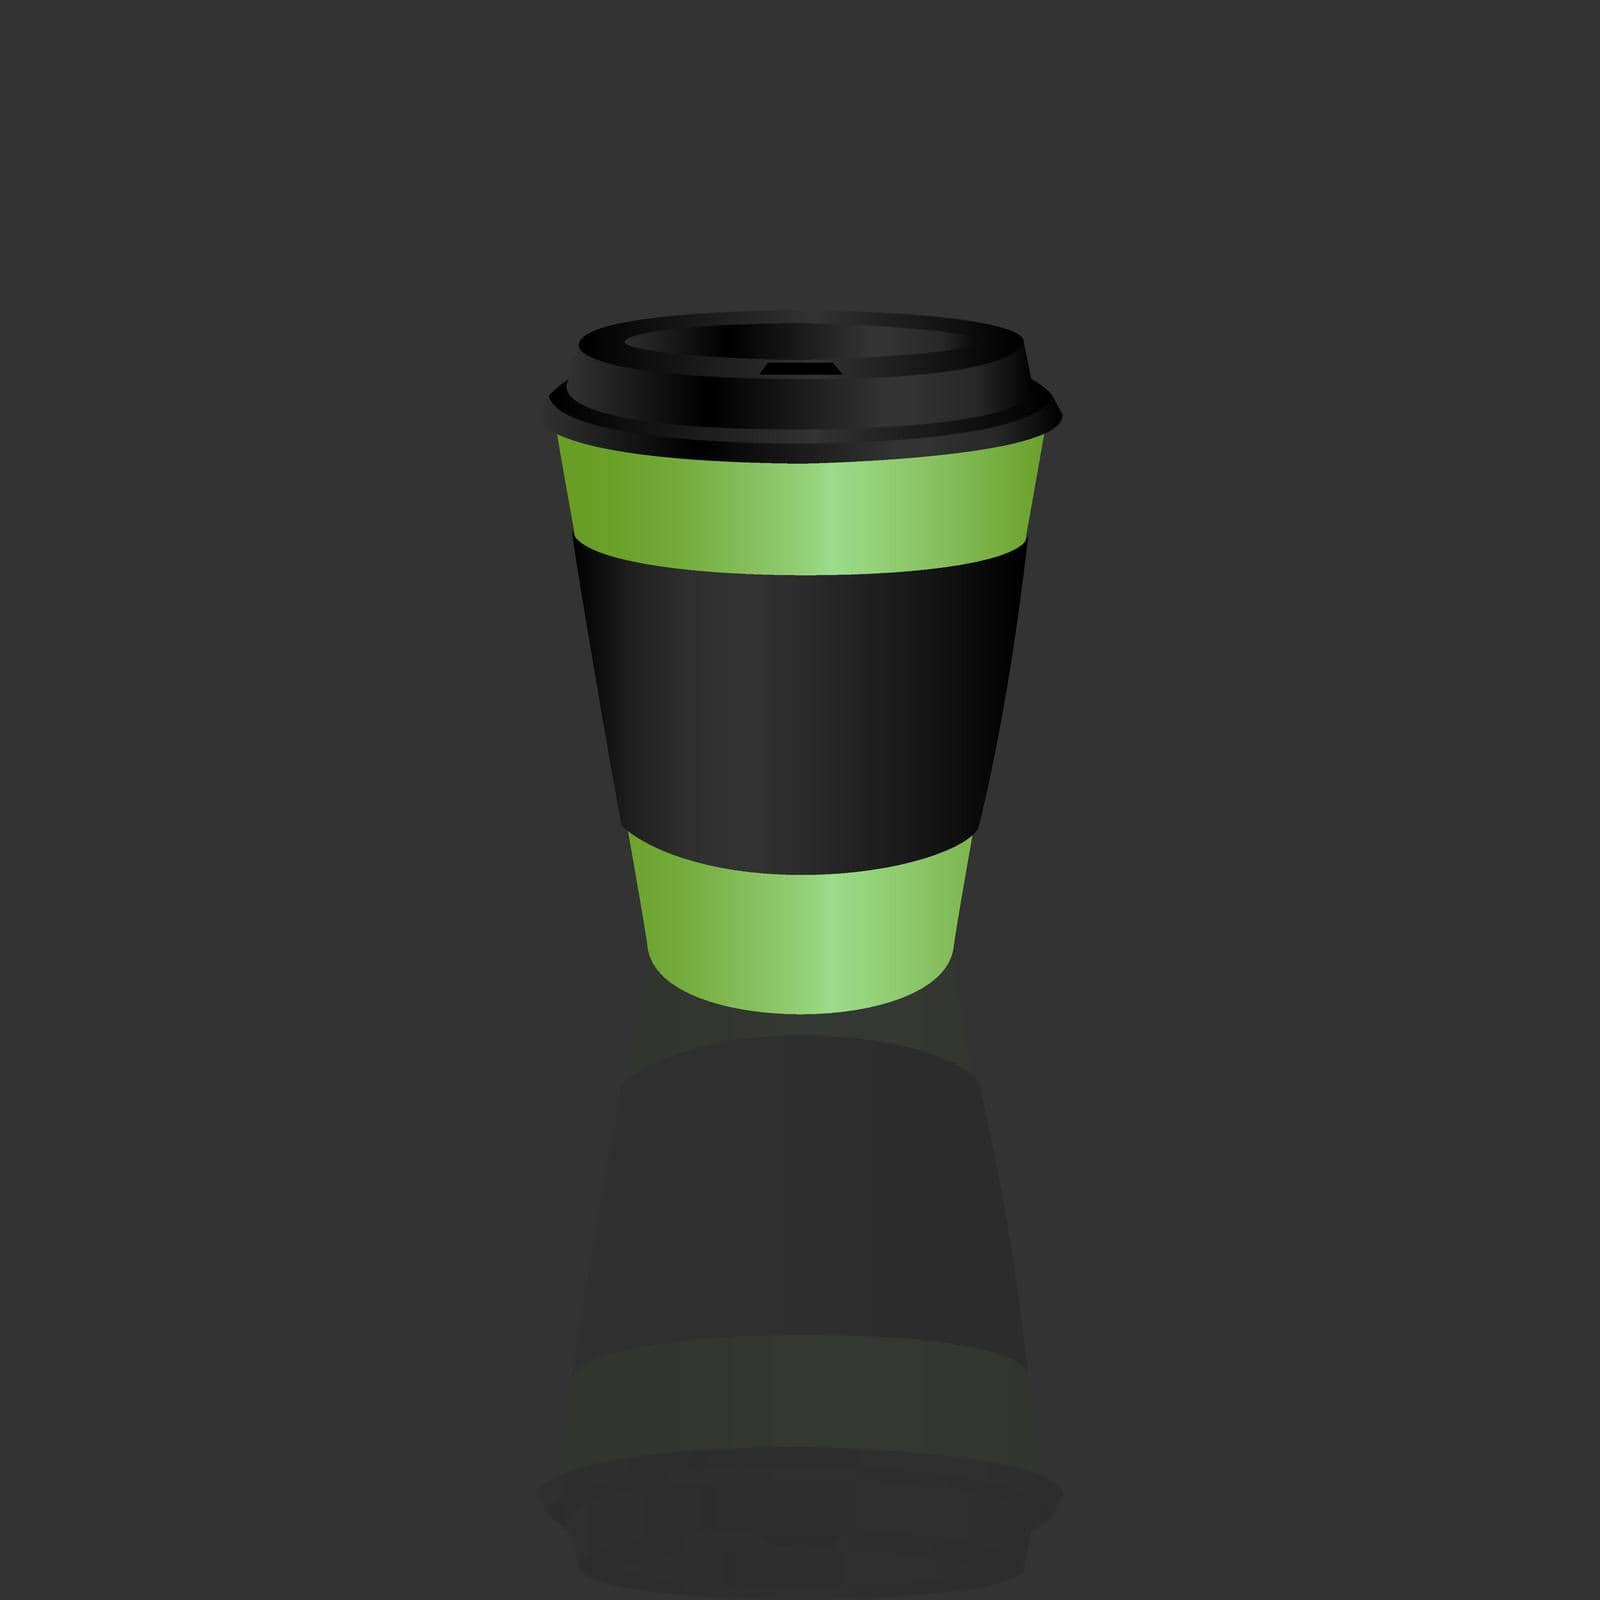 Takeaway Hot coffee cup, Can be any kind of hot drink like Hot green tea latte, Hot latte coffee or Cappuccino in Lime-green paper cups with black lids and shadow in black background